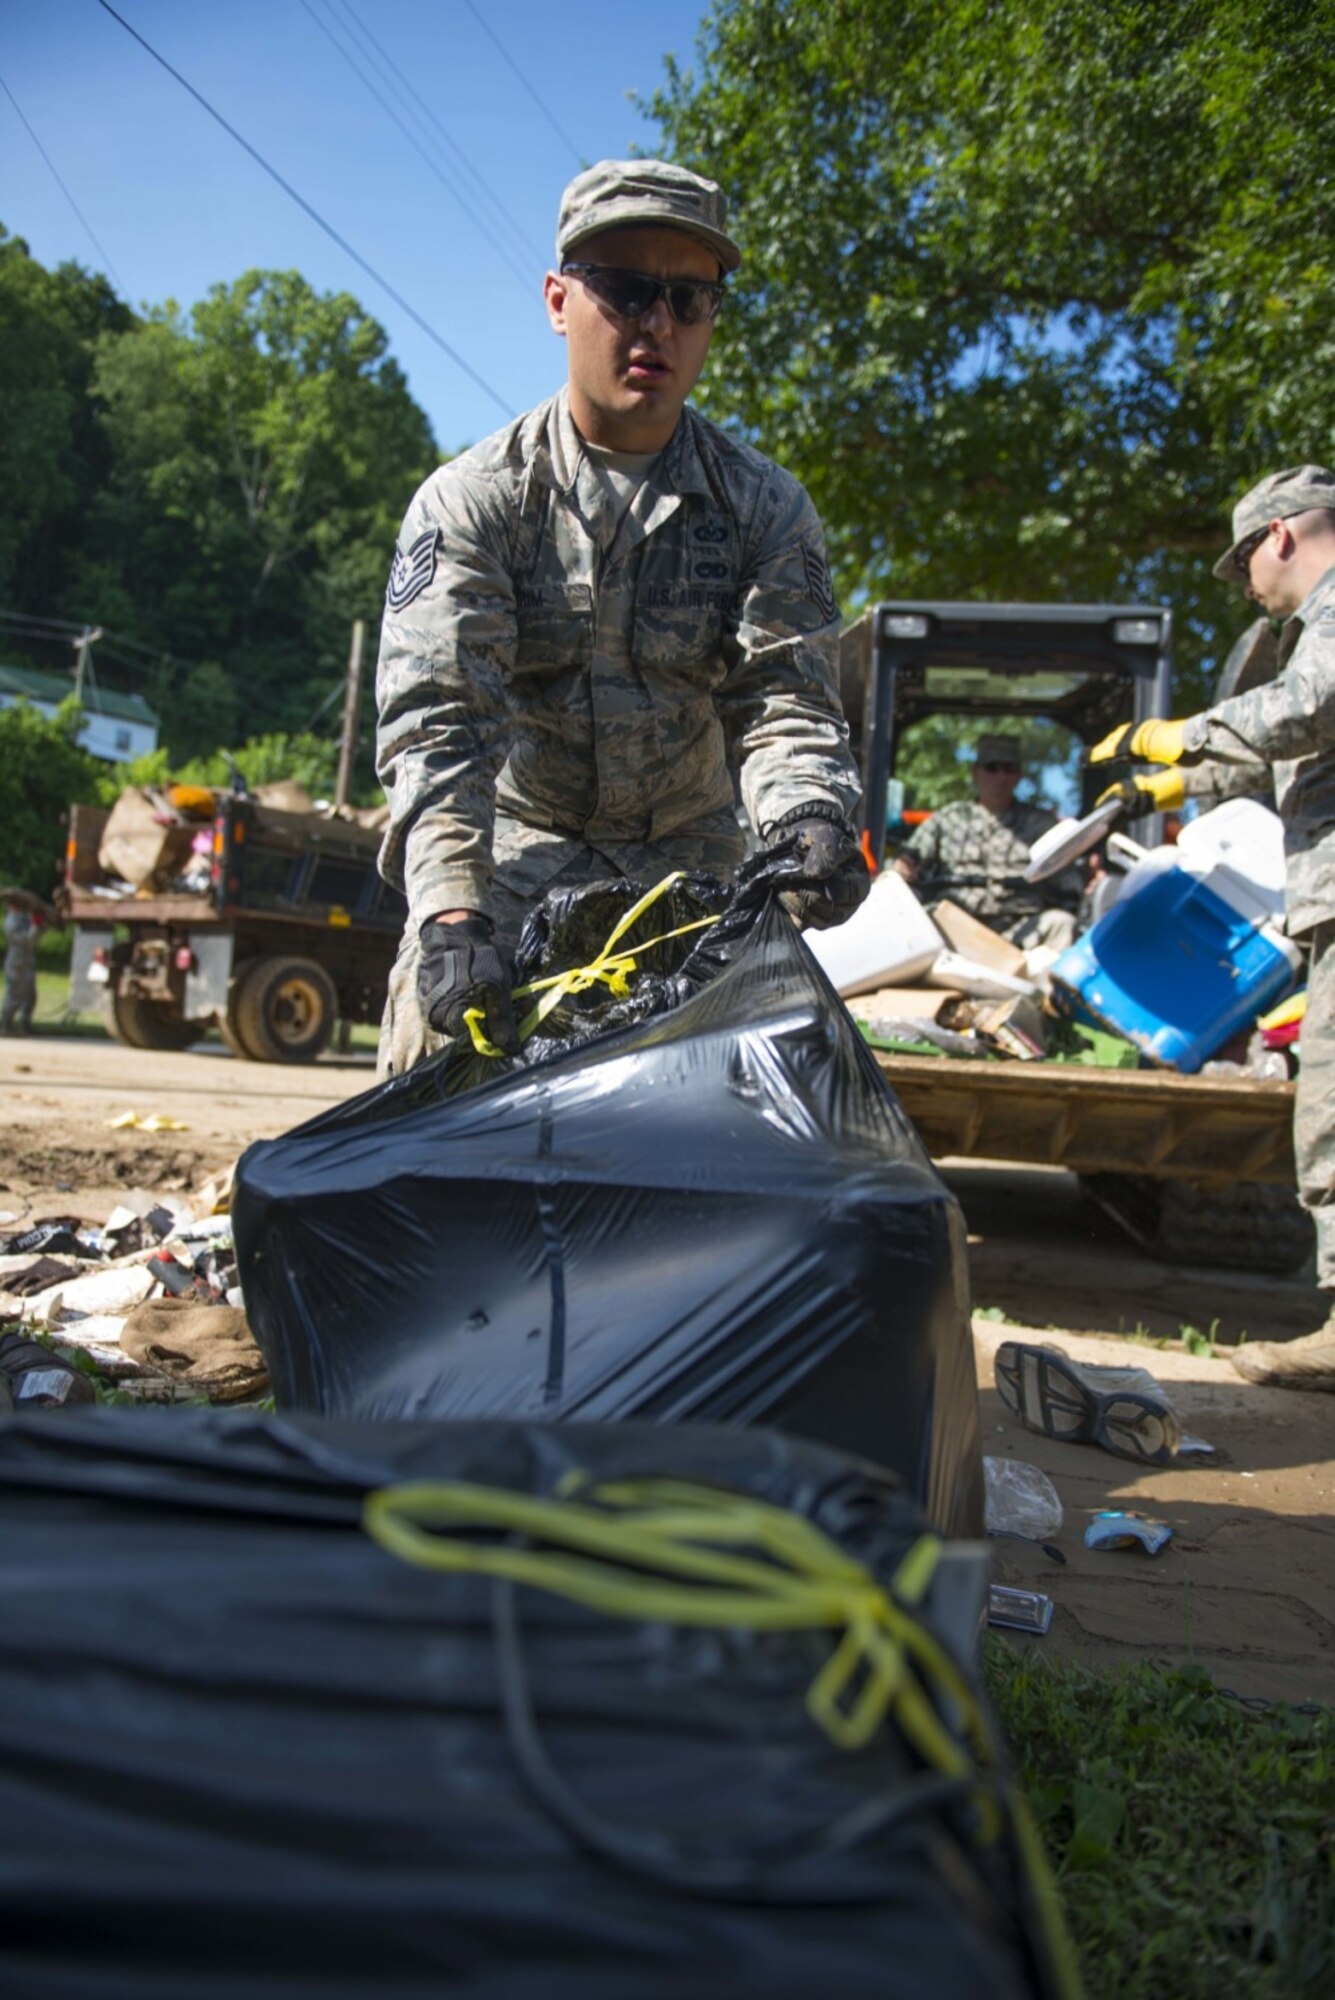 Tech. Sgt. Brian Grim of the 167th Airlift Wing, Martinsburg, W.Va., picks up debris on June 26, 2016 in Clendenin, W.Va. The June 23, 2016 flood was described as a once in 1000 year event leading W.Va. Gov. Earl Ray Tomblin to declare a State of Emergency in 44 of the 55 counties. (United States Air National Guard photo/Tech. Sgt. De-Juan Haley)